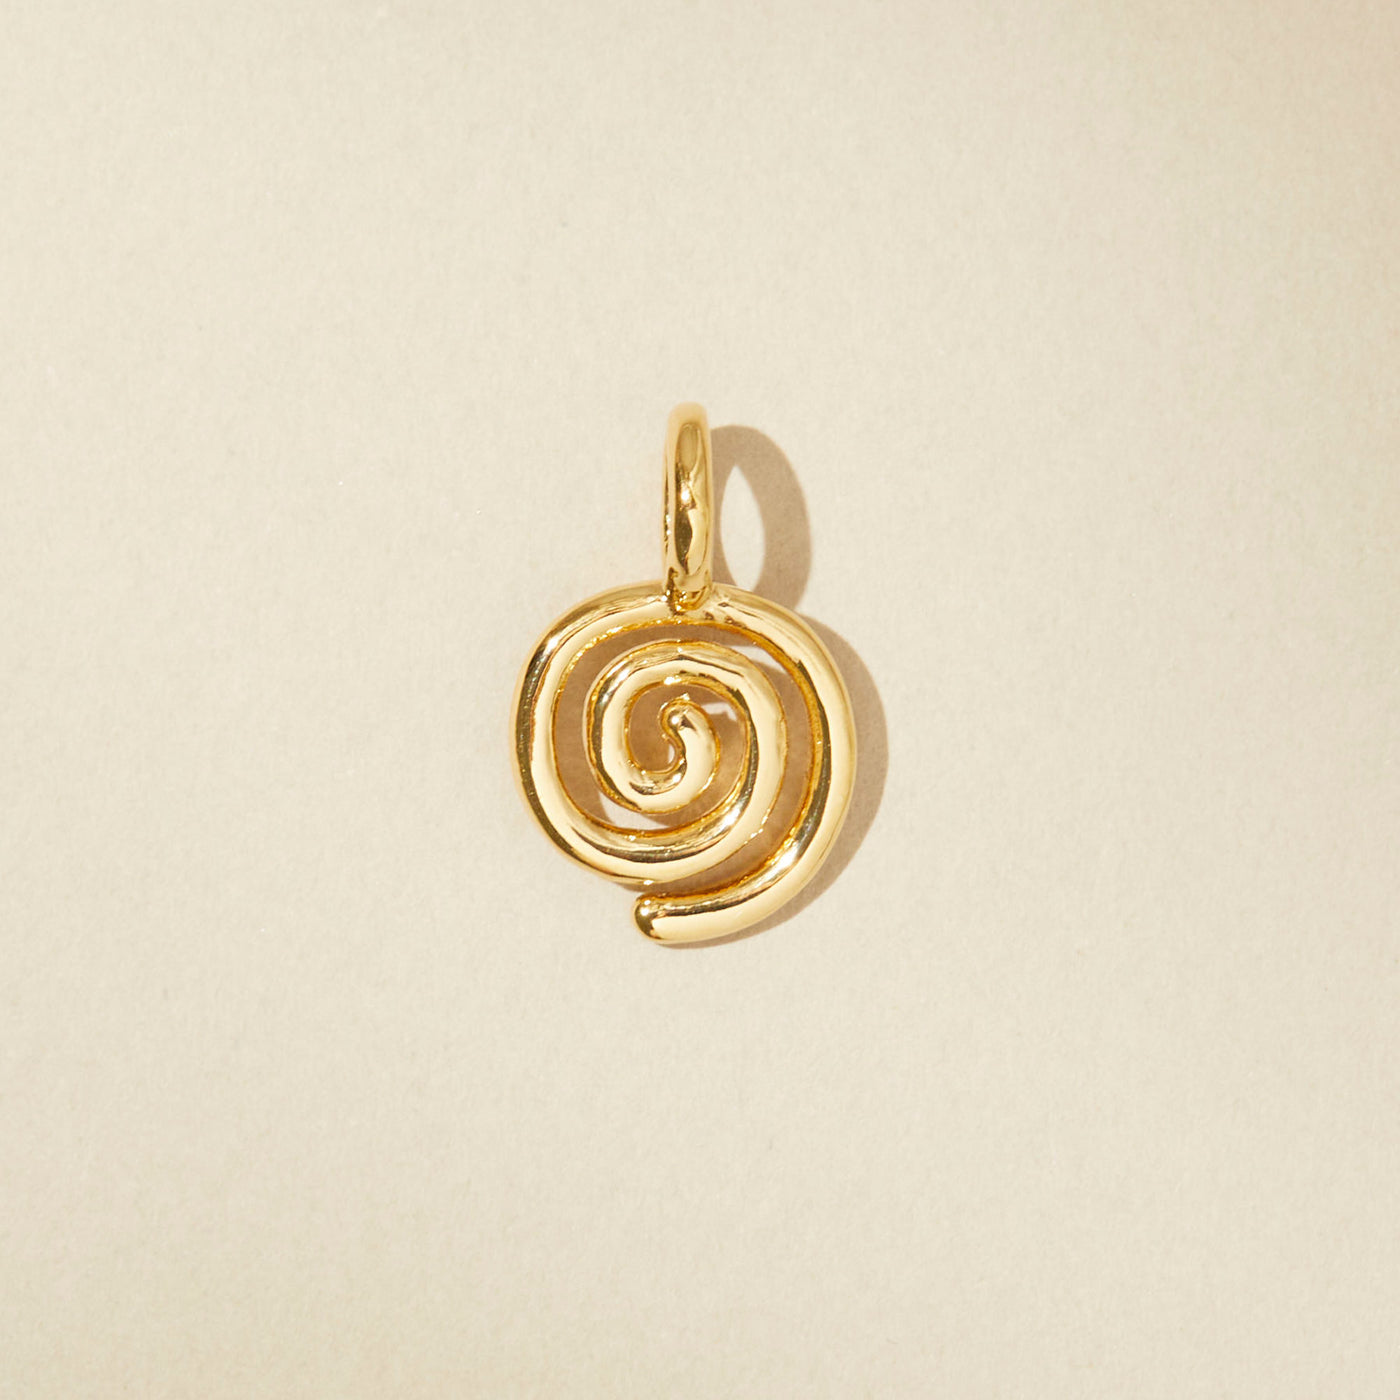 Spiral charm in gold